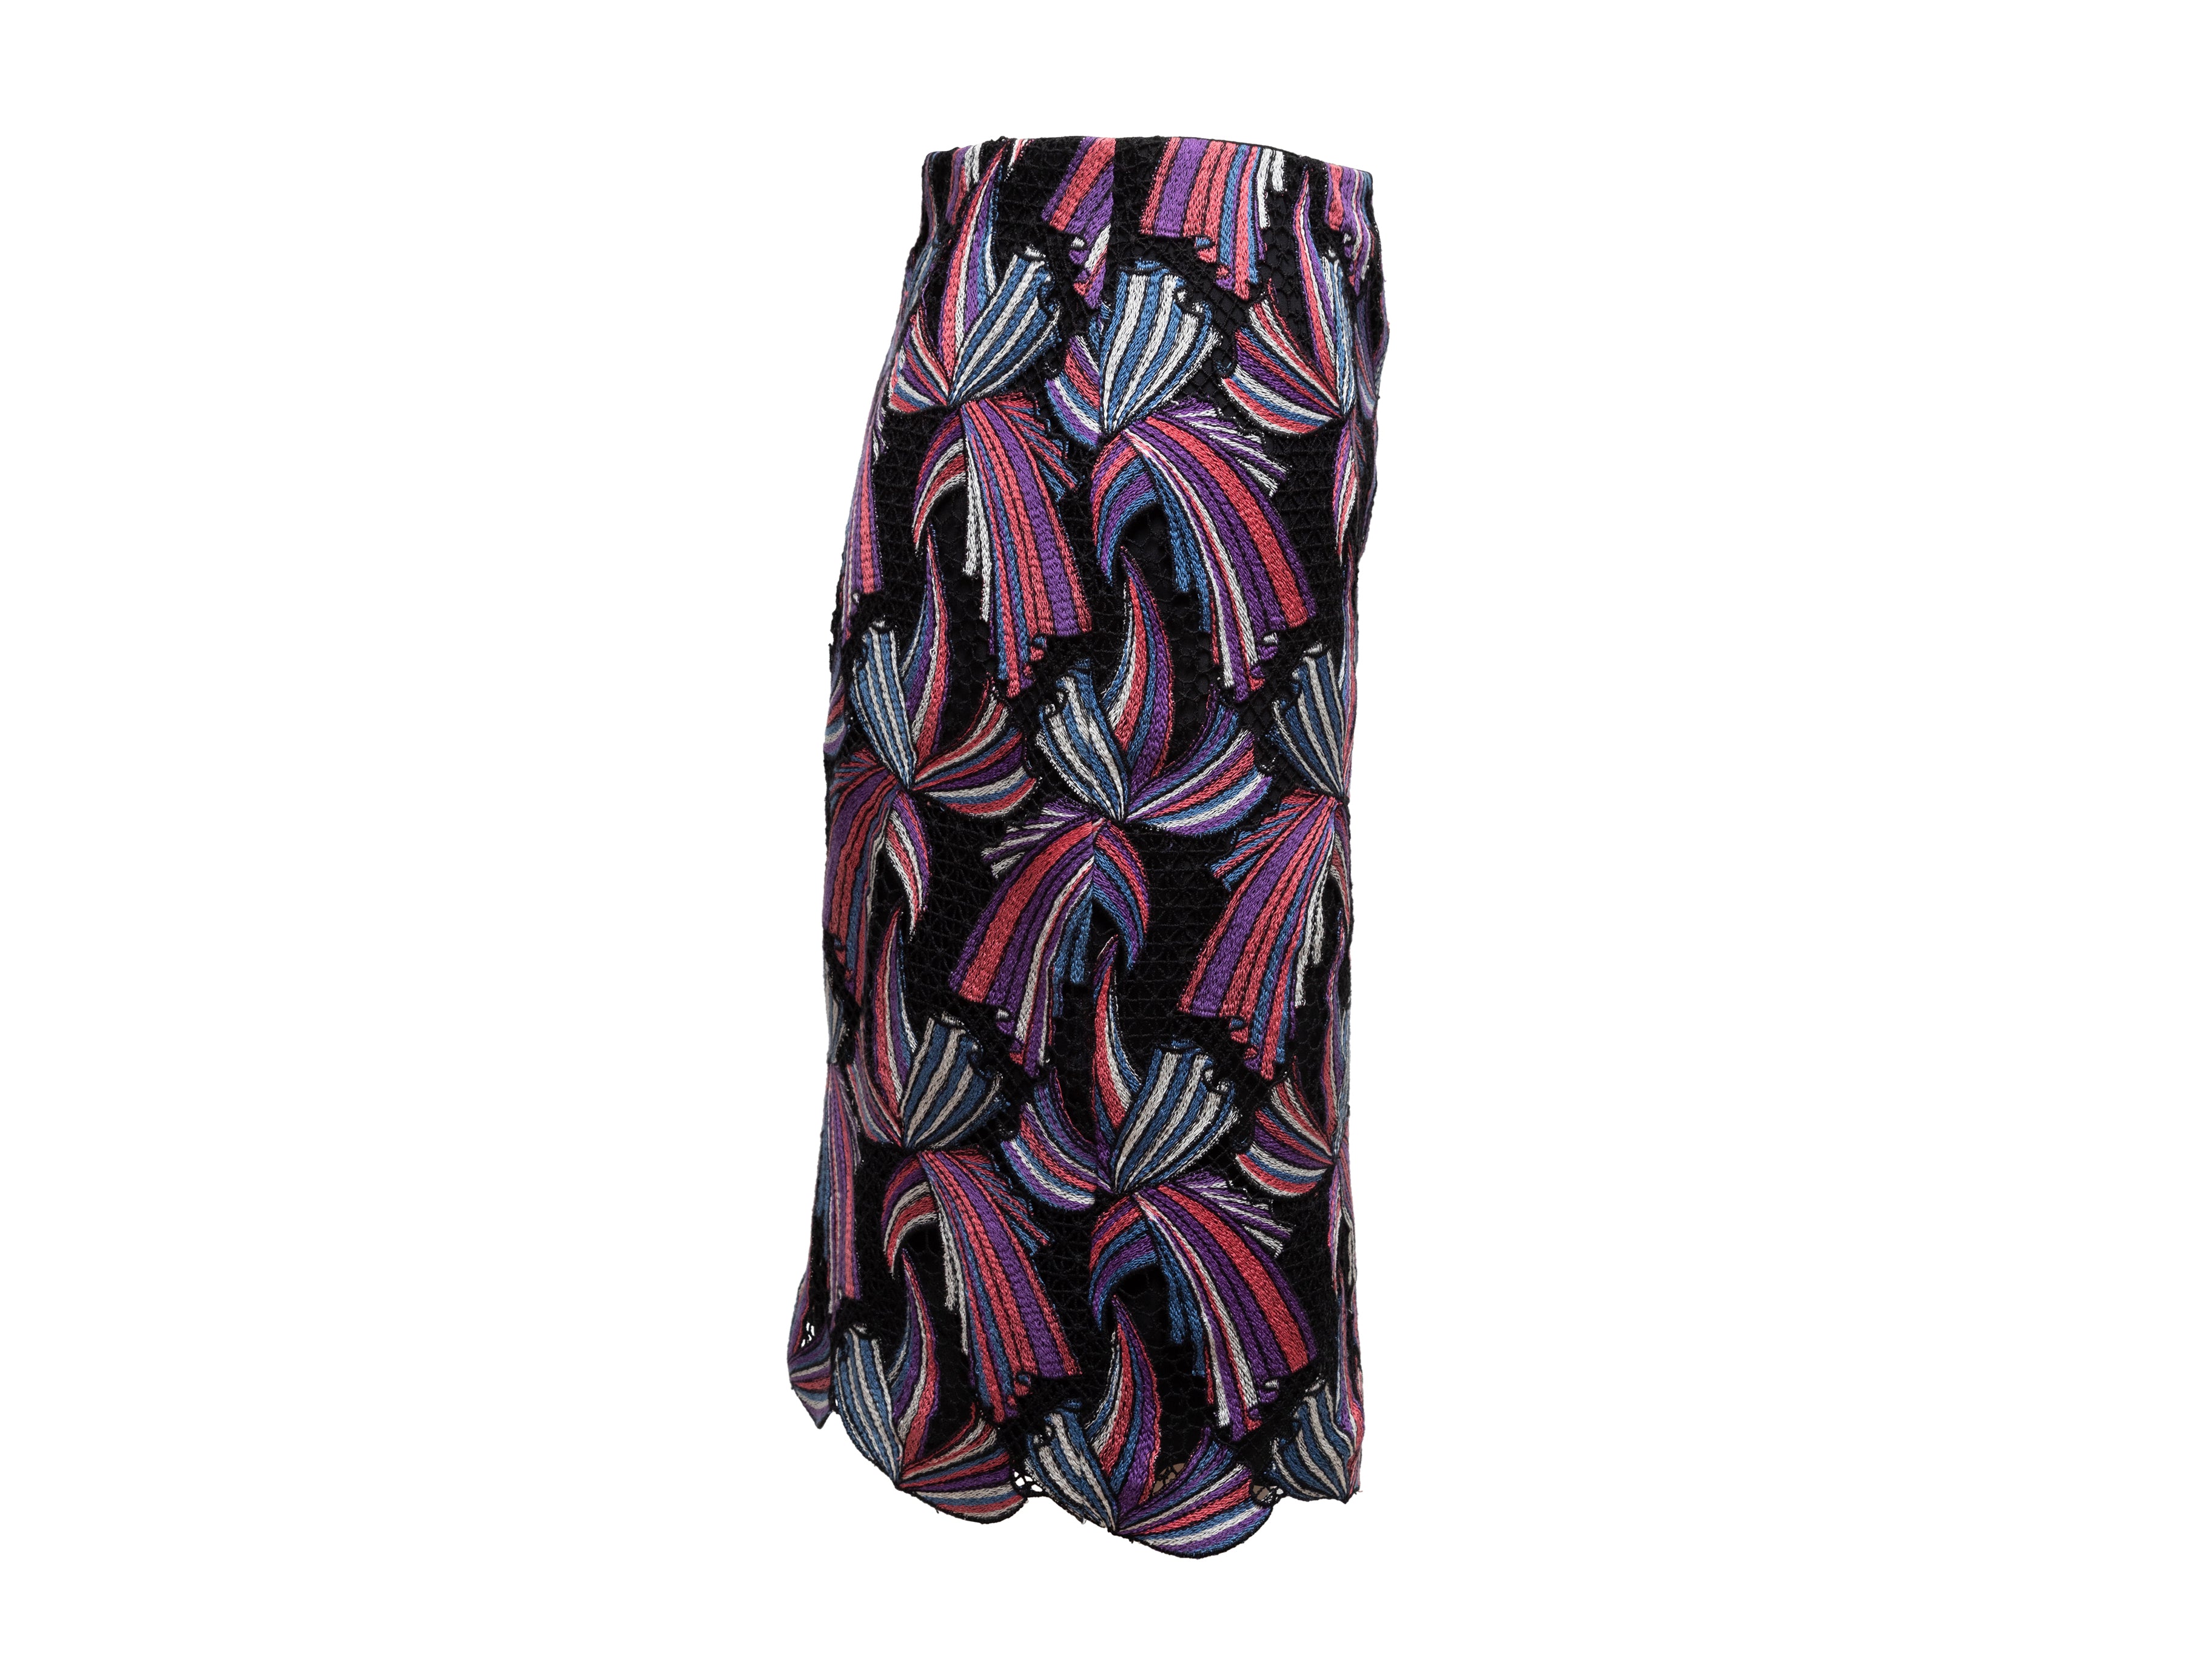 Black & Multicolor Embroidered Skirt